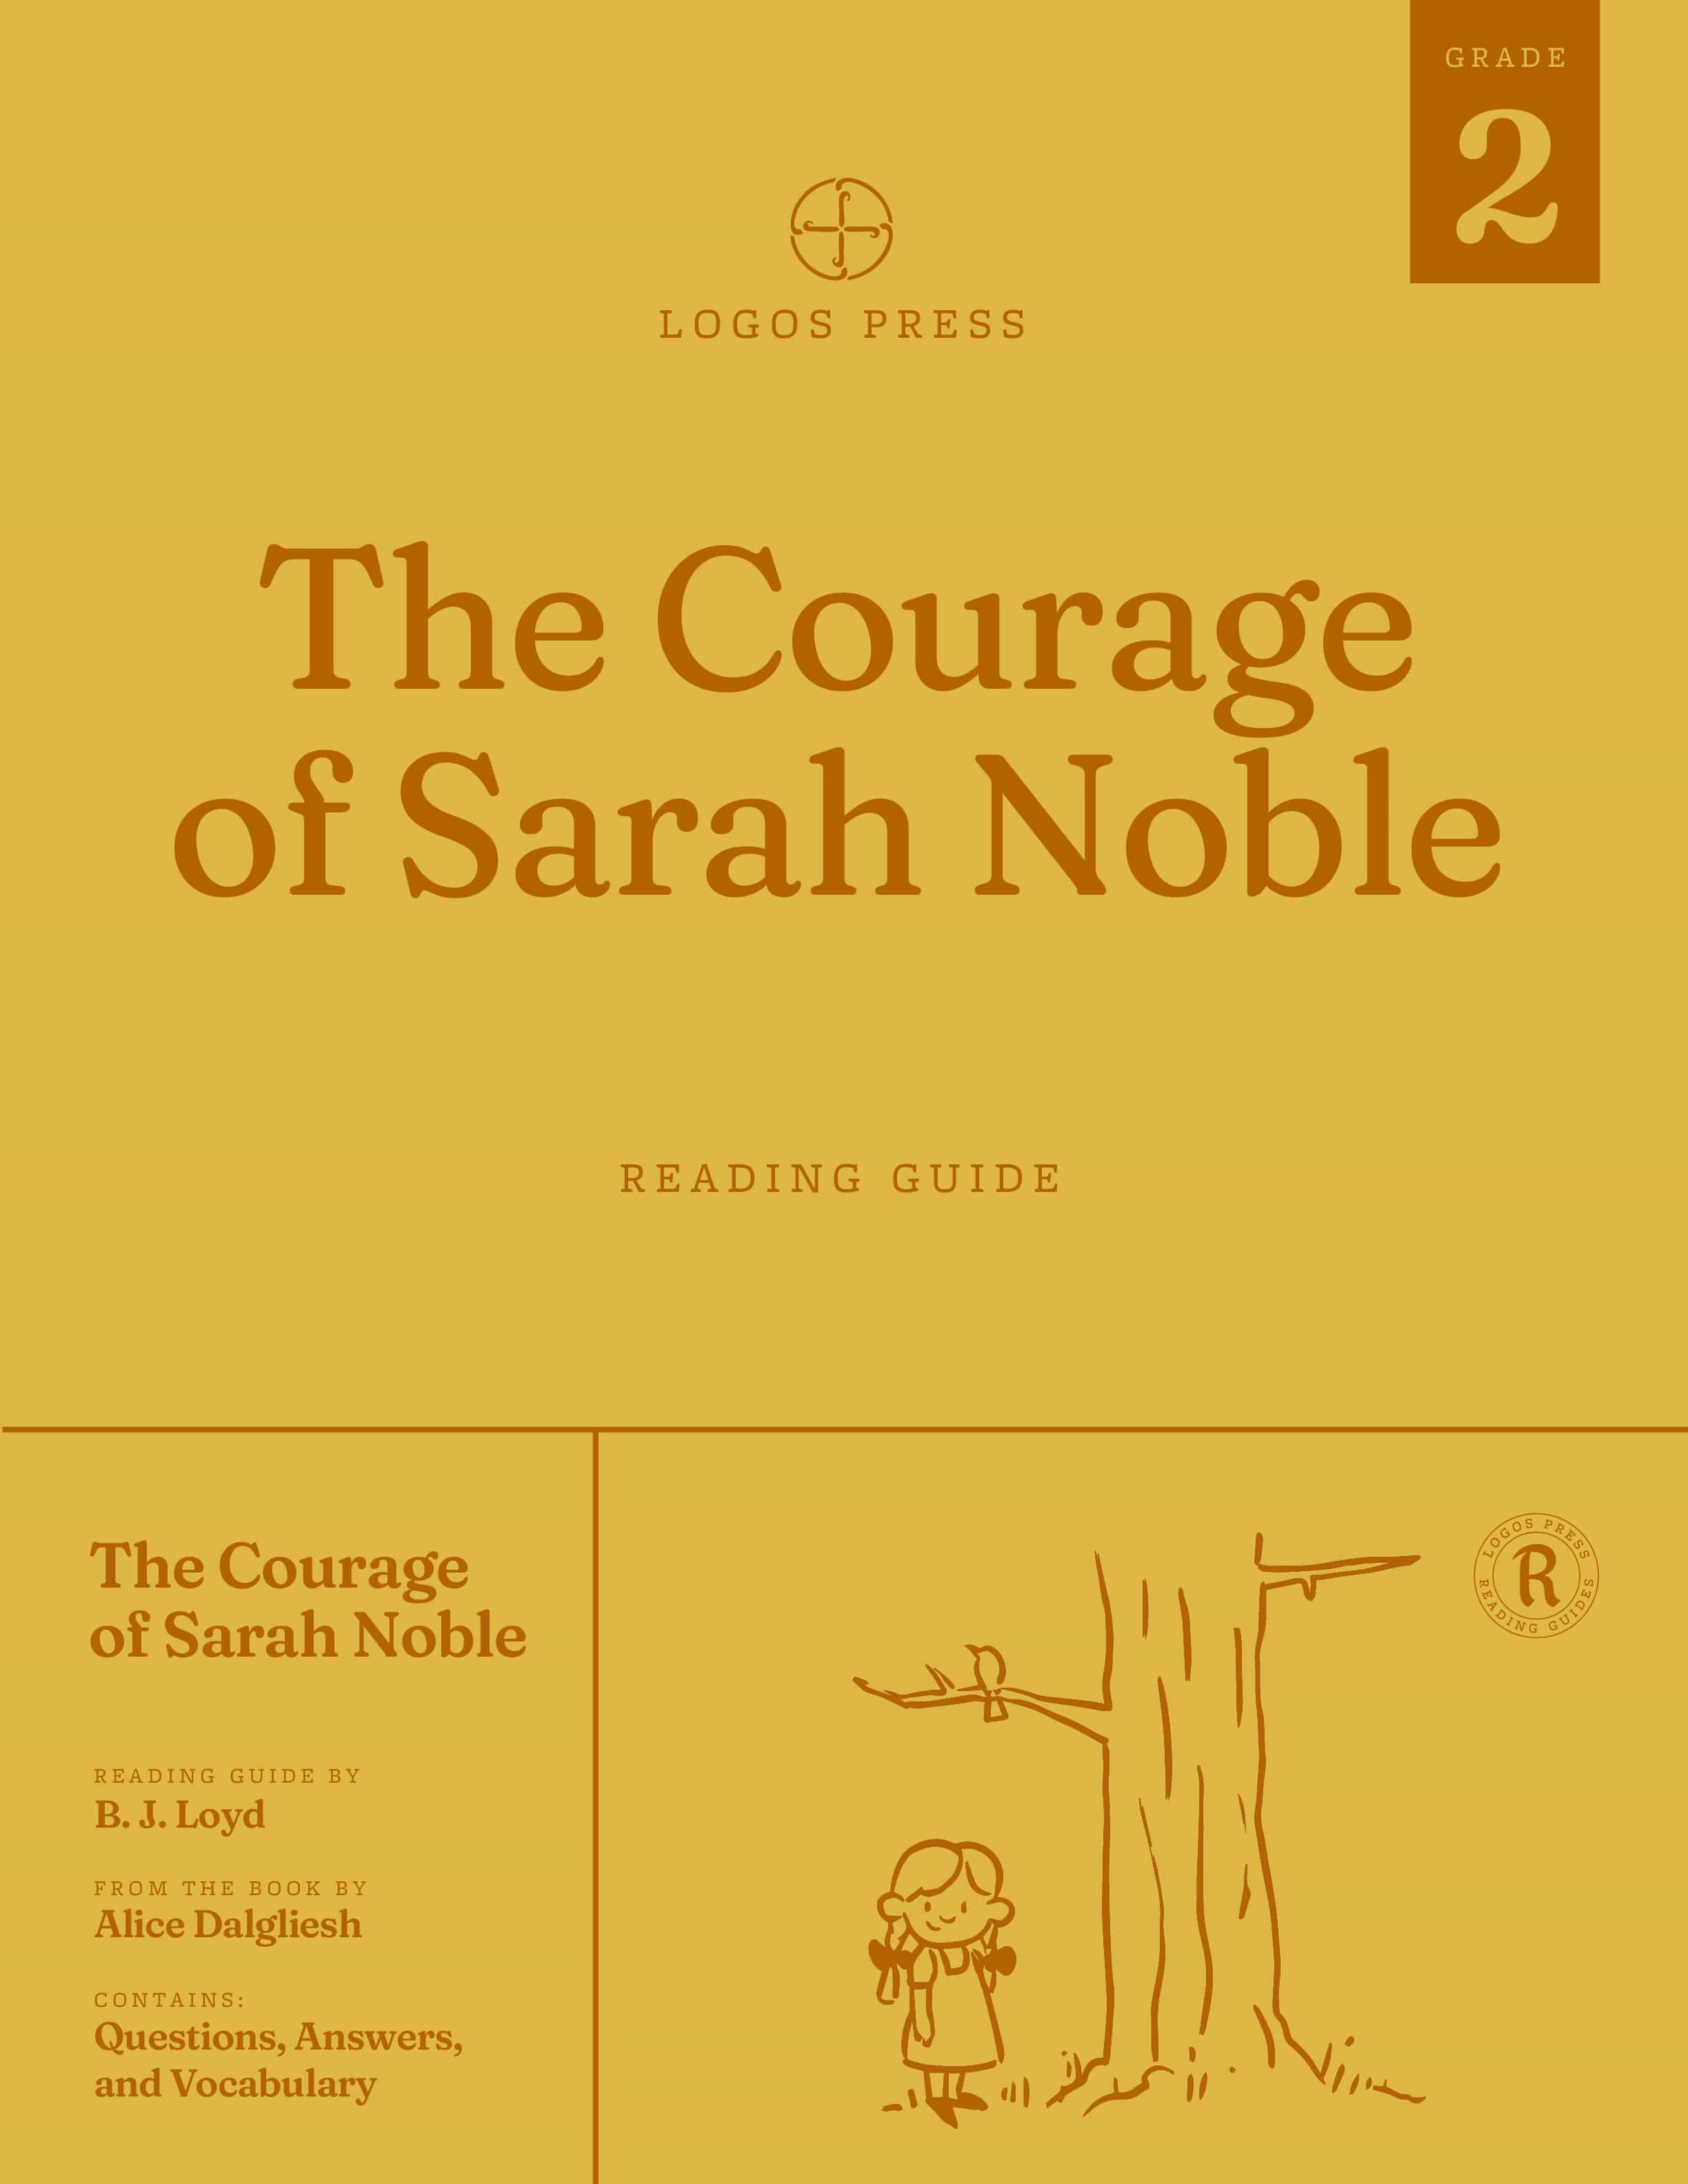 The Courage of Sarah Noble - Reading Guide (Download)